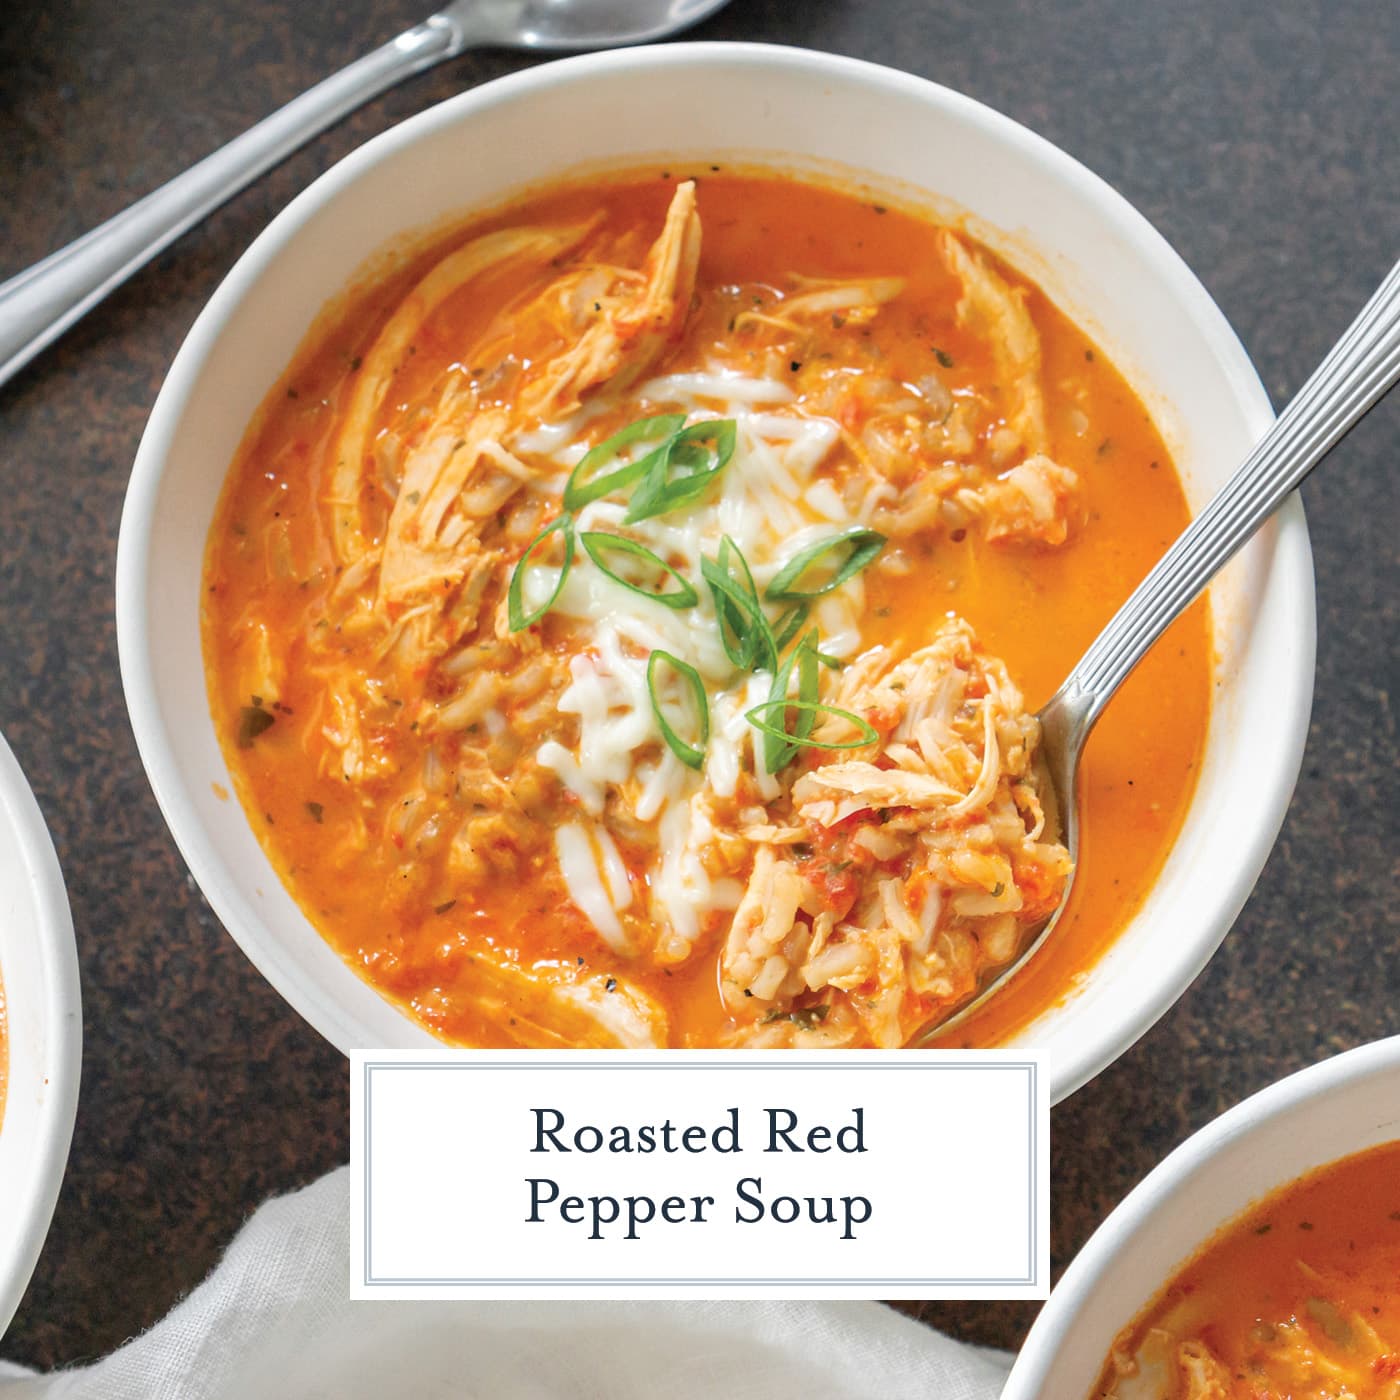 spoon in bowl of red pepper soup with text overlay for facebook